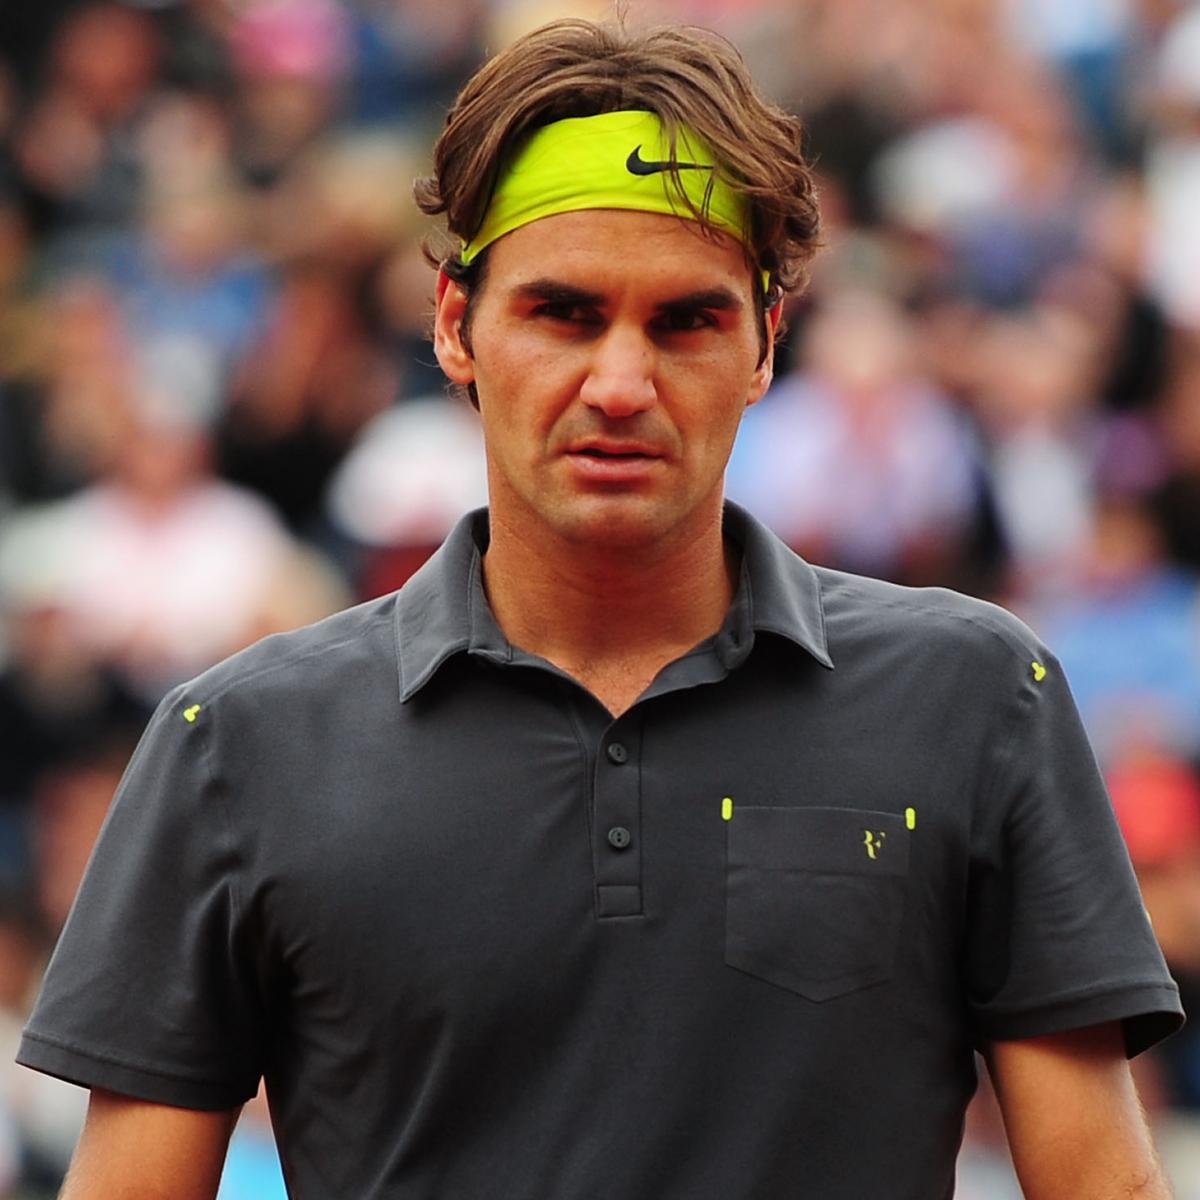 French Open 2012: Roger Federer's Last Hope for Another Grand Slam Is